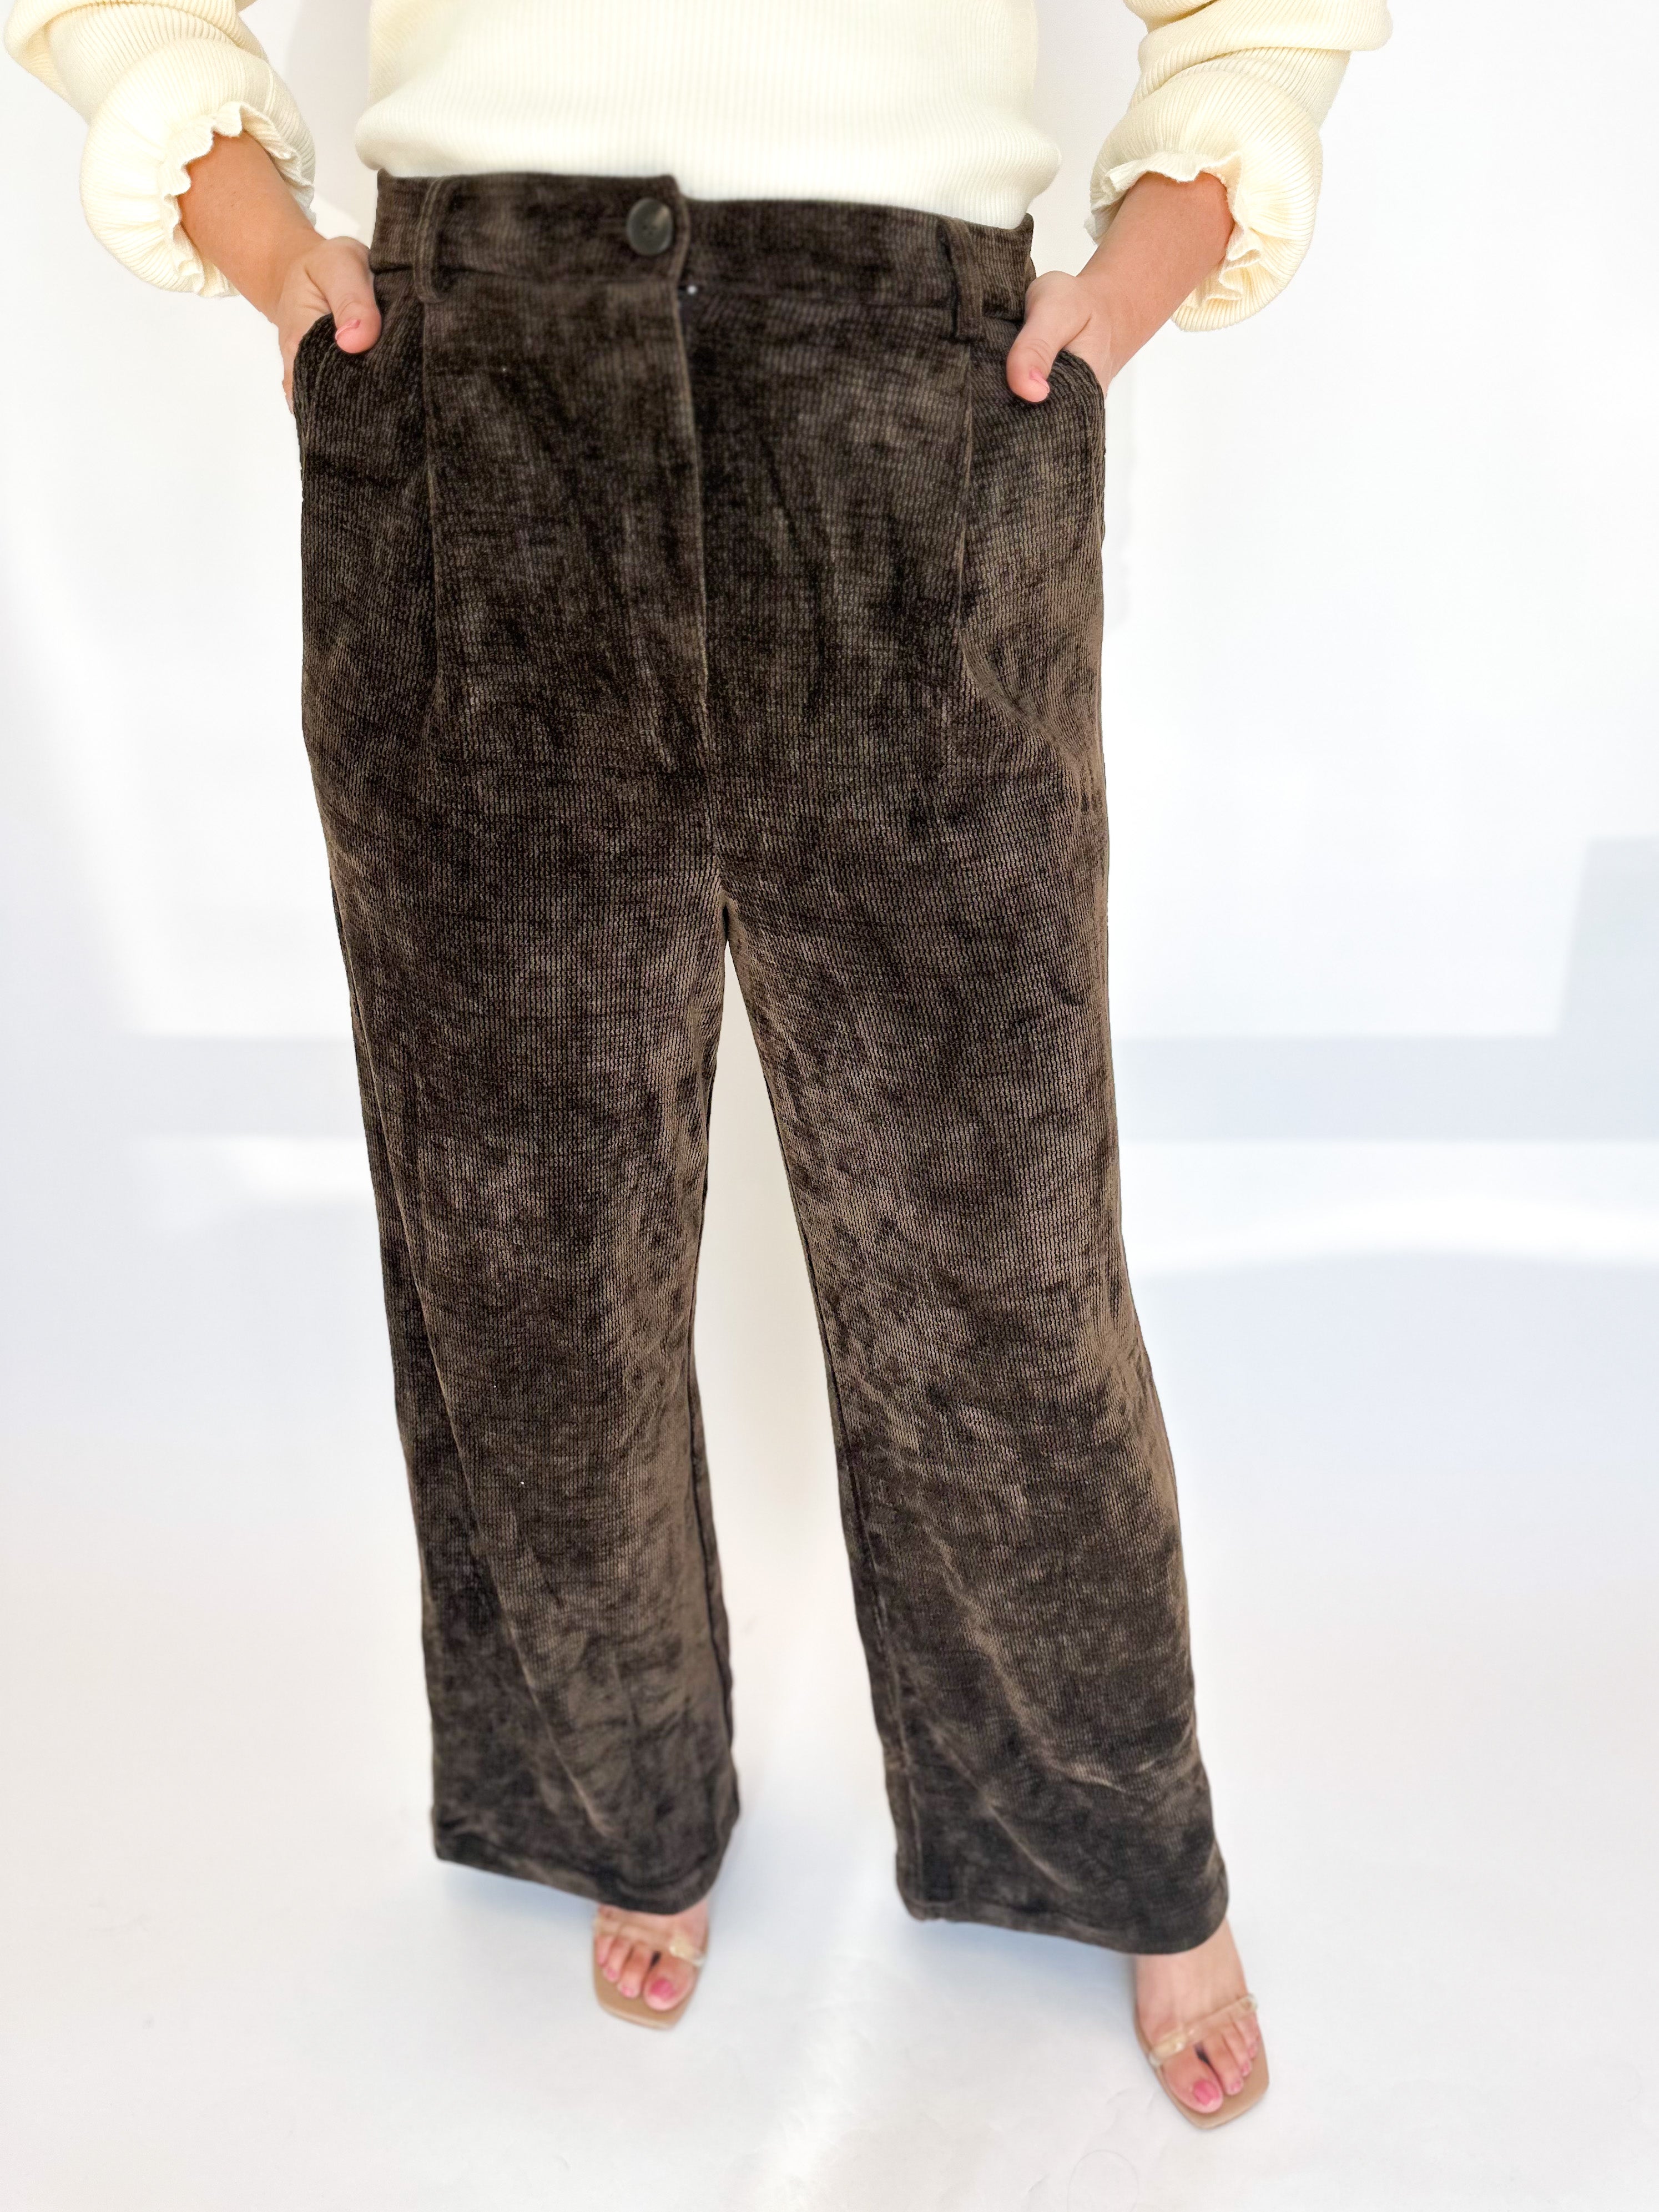 The Fall It Girl Trouser Pants-400 Pants-CURRENT AIR CLOTHING-July & June Women's Fashion Boutique Located in San Antonio, Texas